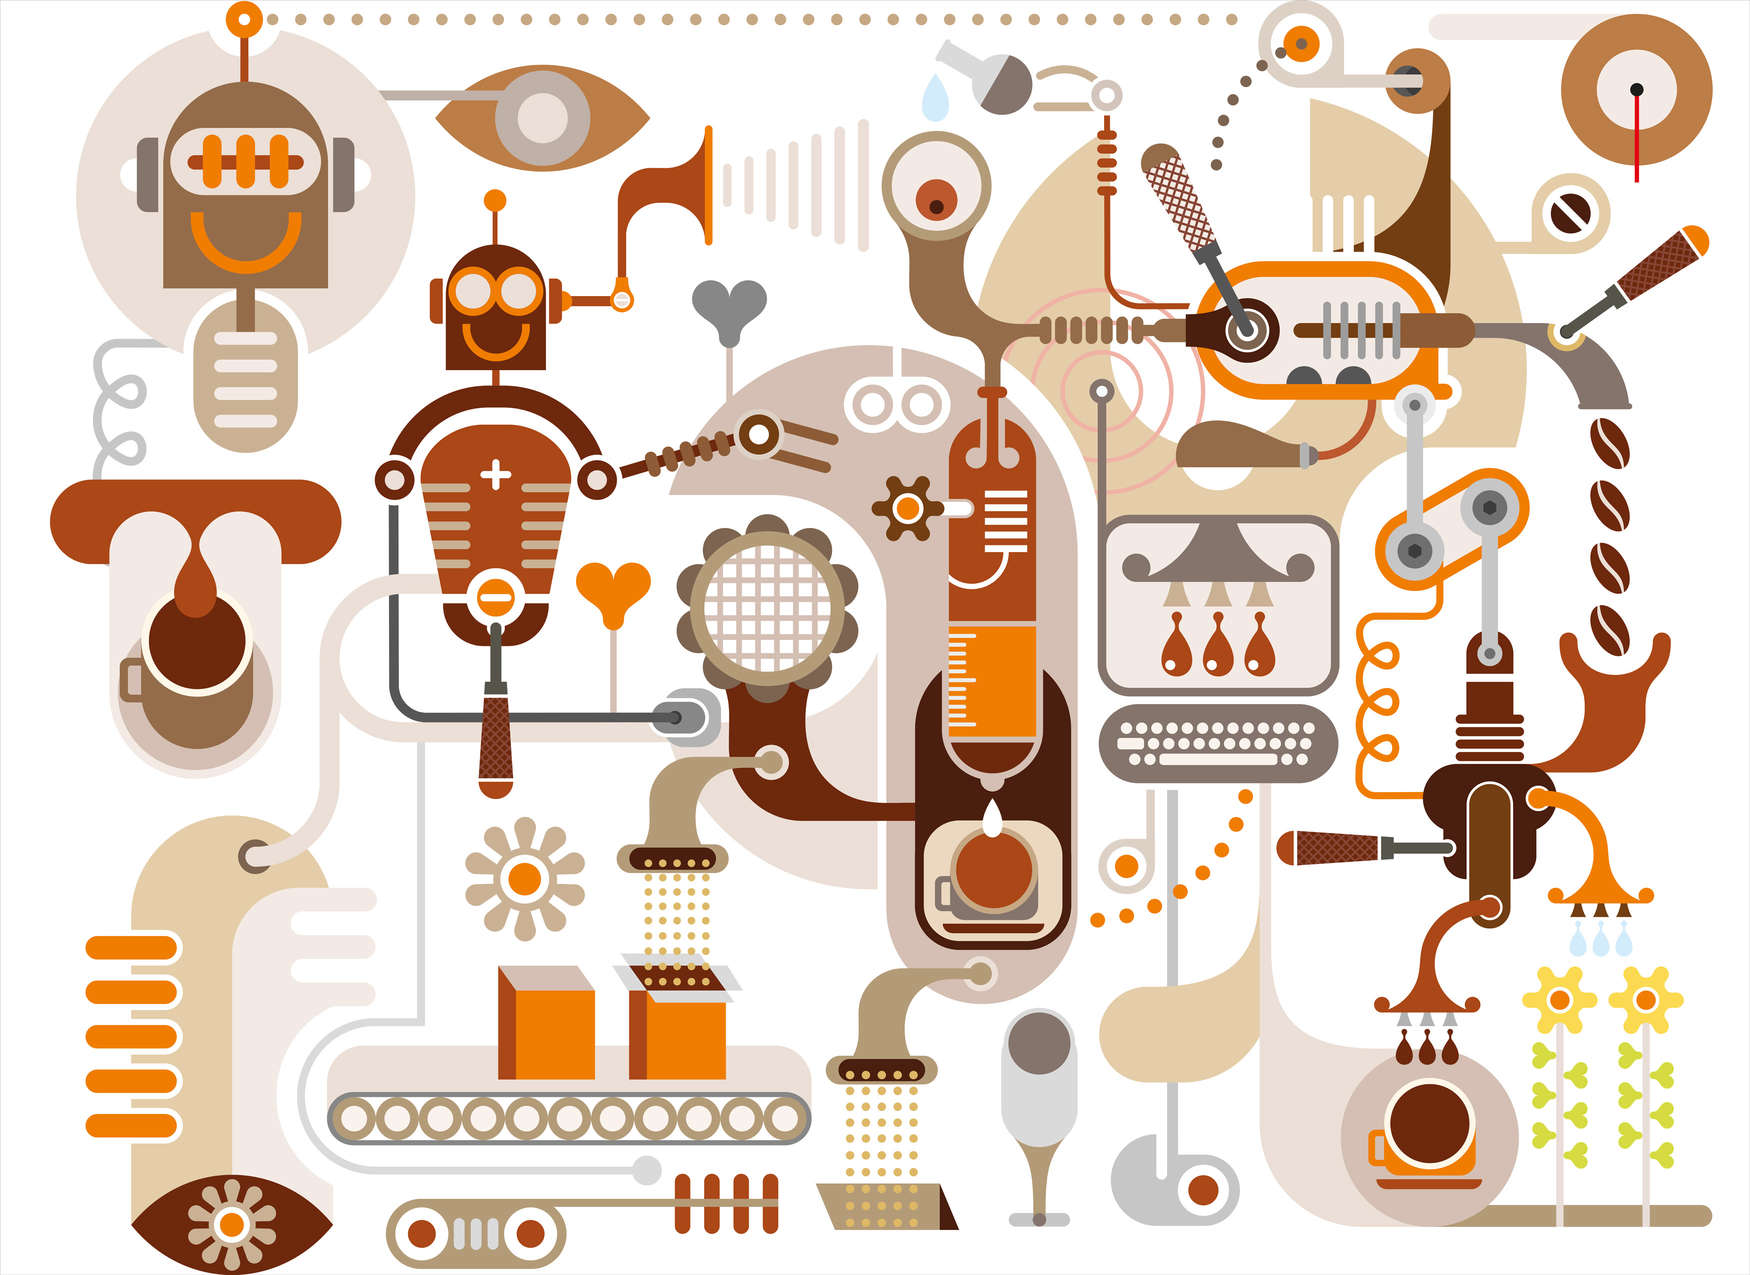             Robots and Machines Wallpaper for the Nursery - Brown, Orange, White
        